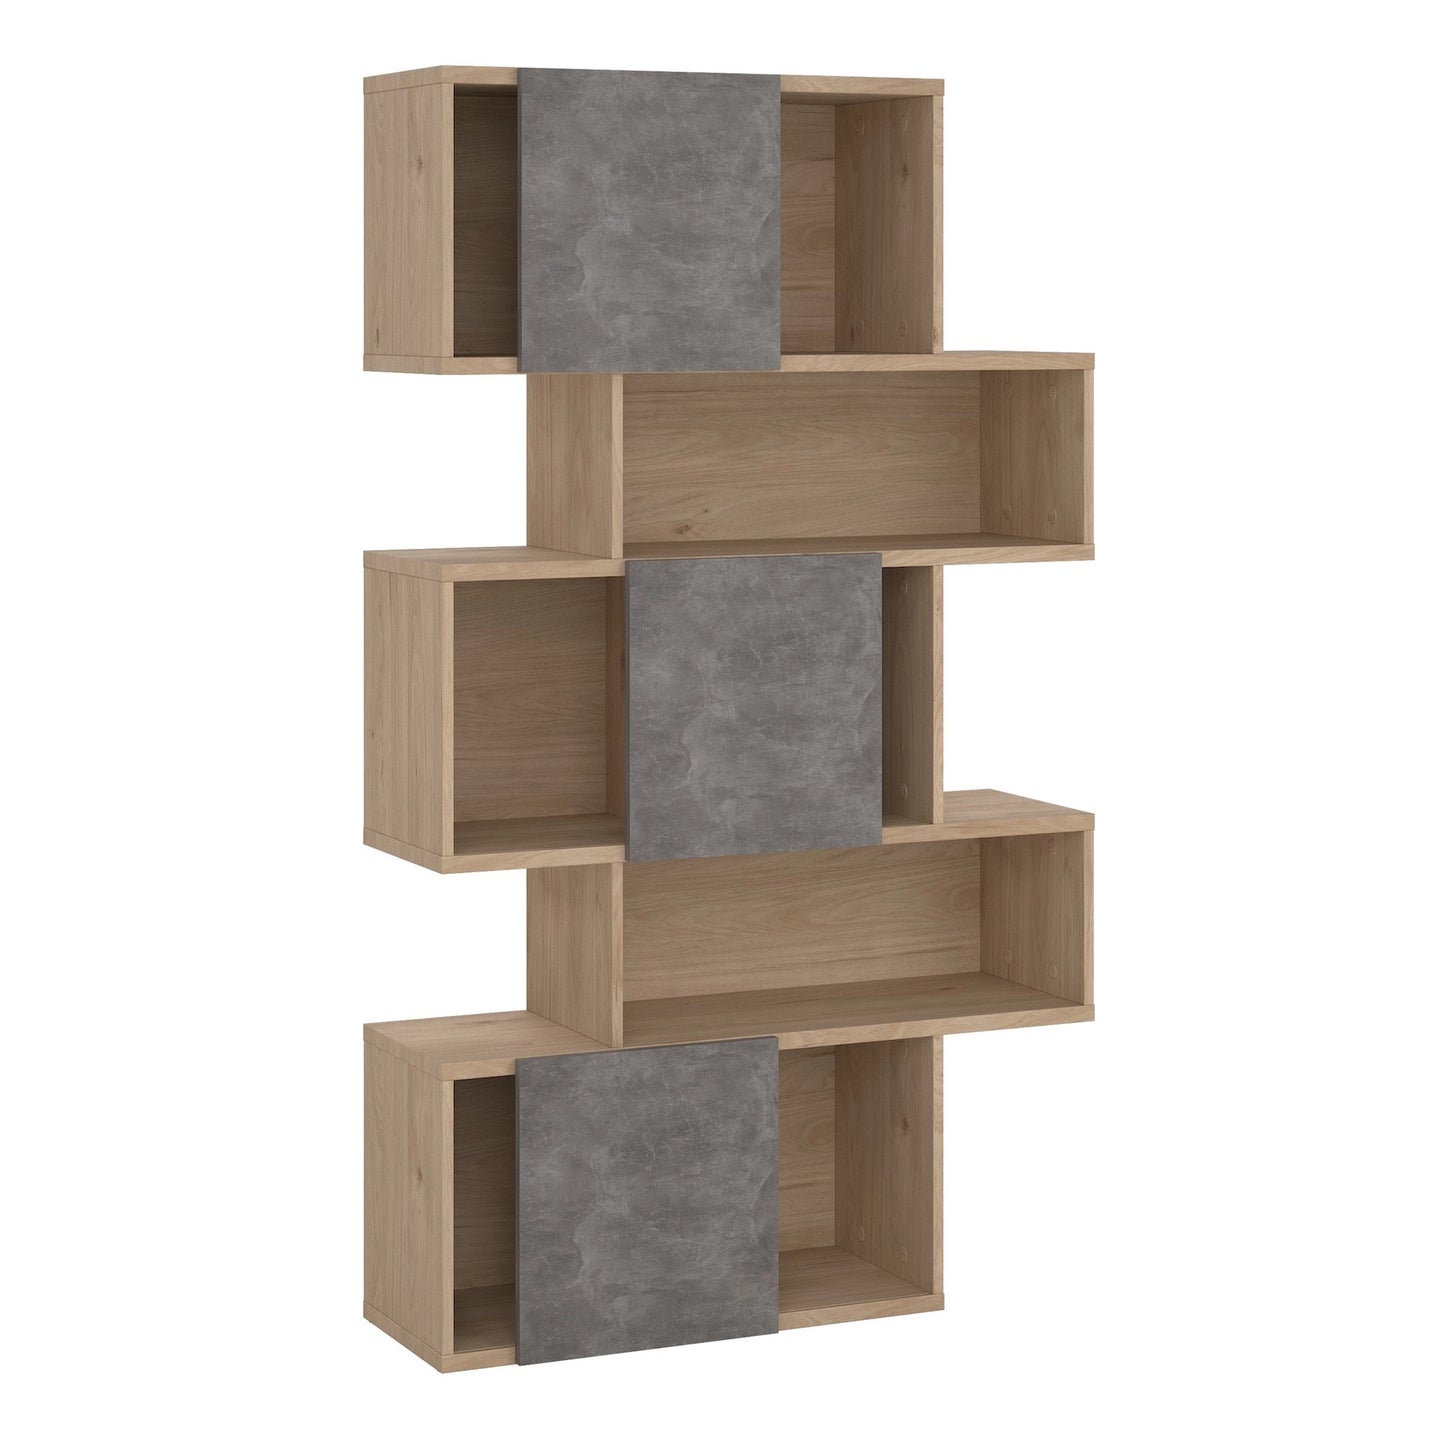 Furniture To Go Maze Asymmetrical Bookcase with 3 Doors in Jackson Hickory & Concrete